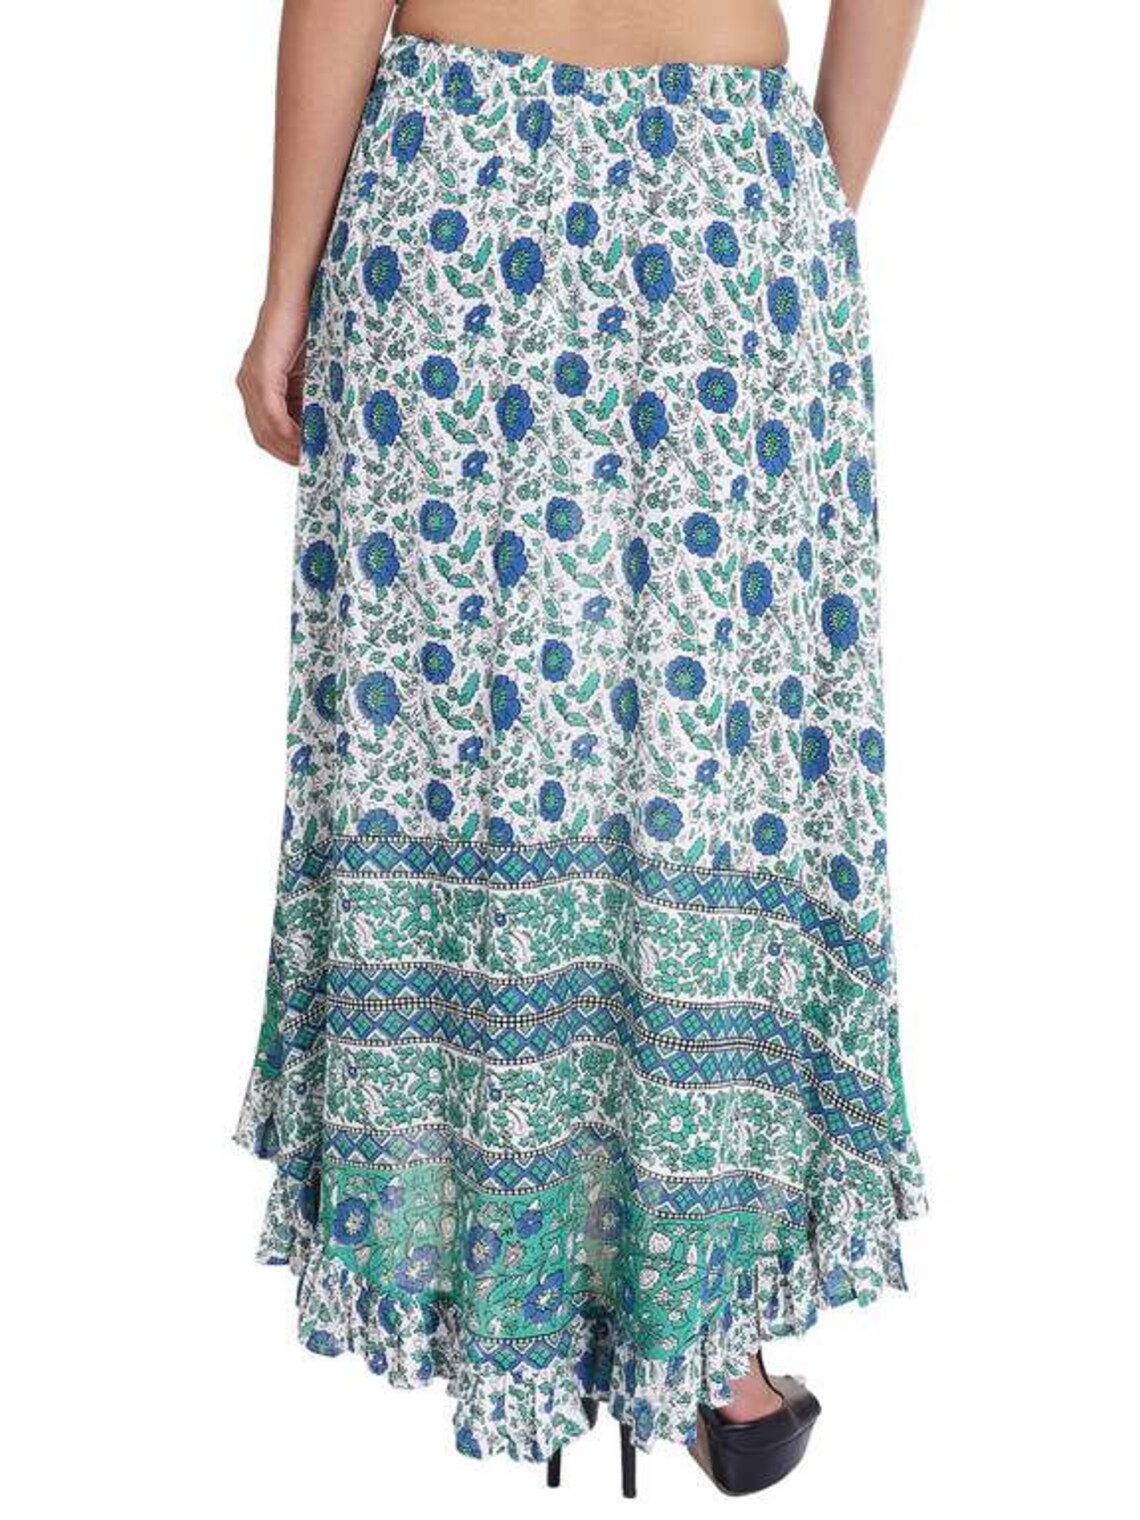 Cotton green blue floral printed women's long skirt | Etsy